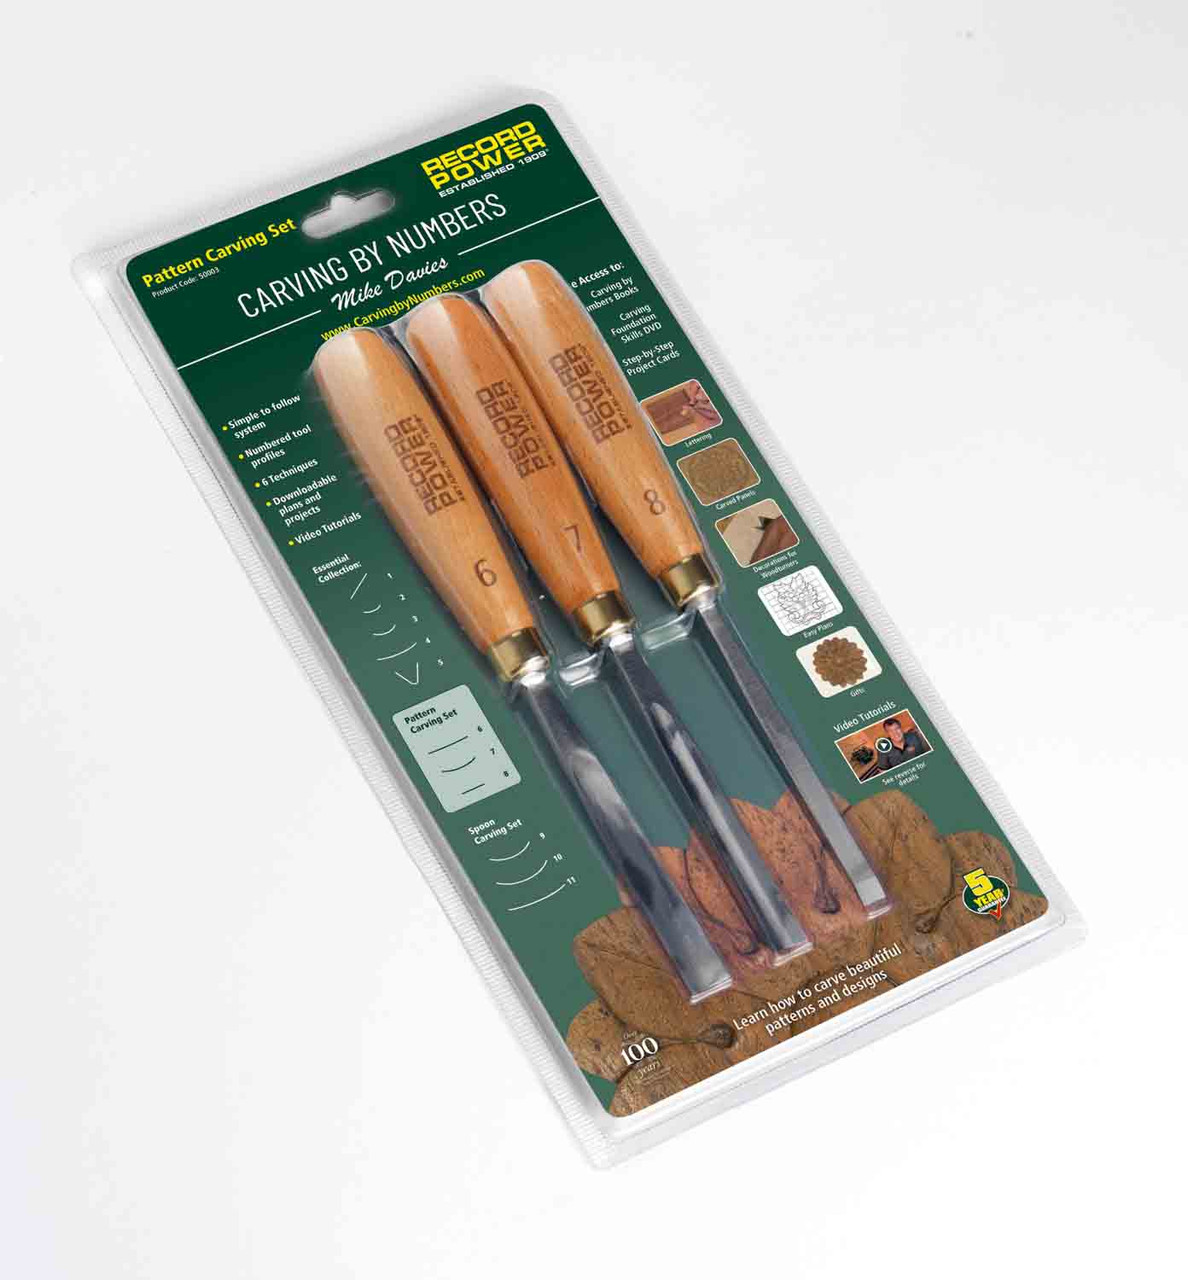 Record Power, 3 Piece Carving by Numbers Tool Set, Pattern Carving